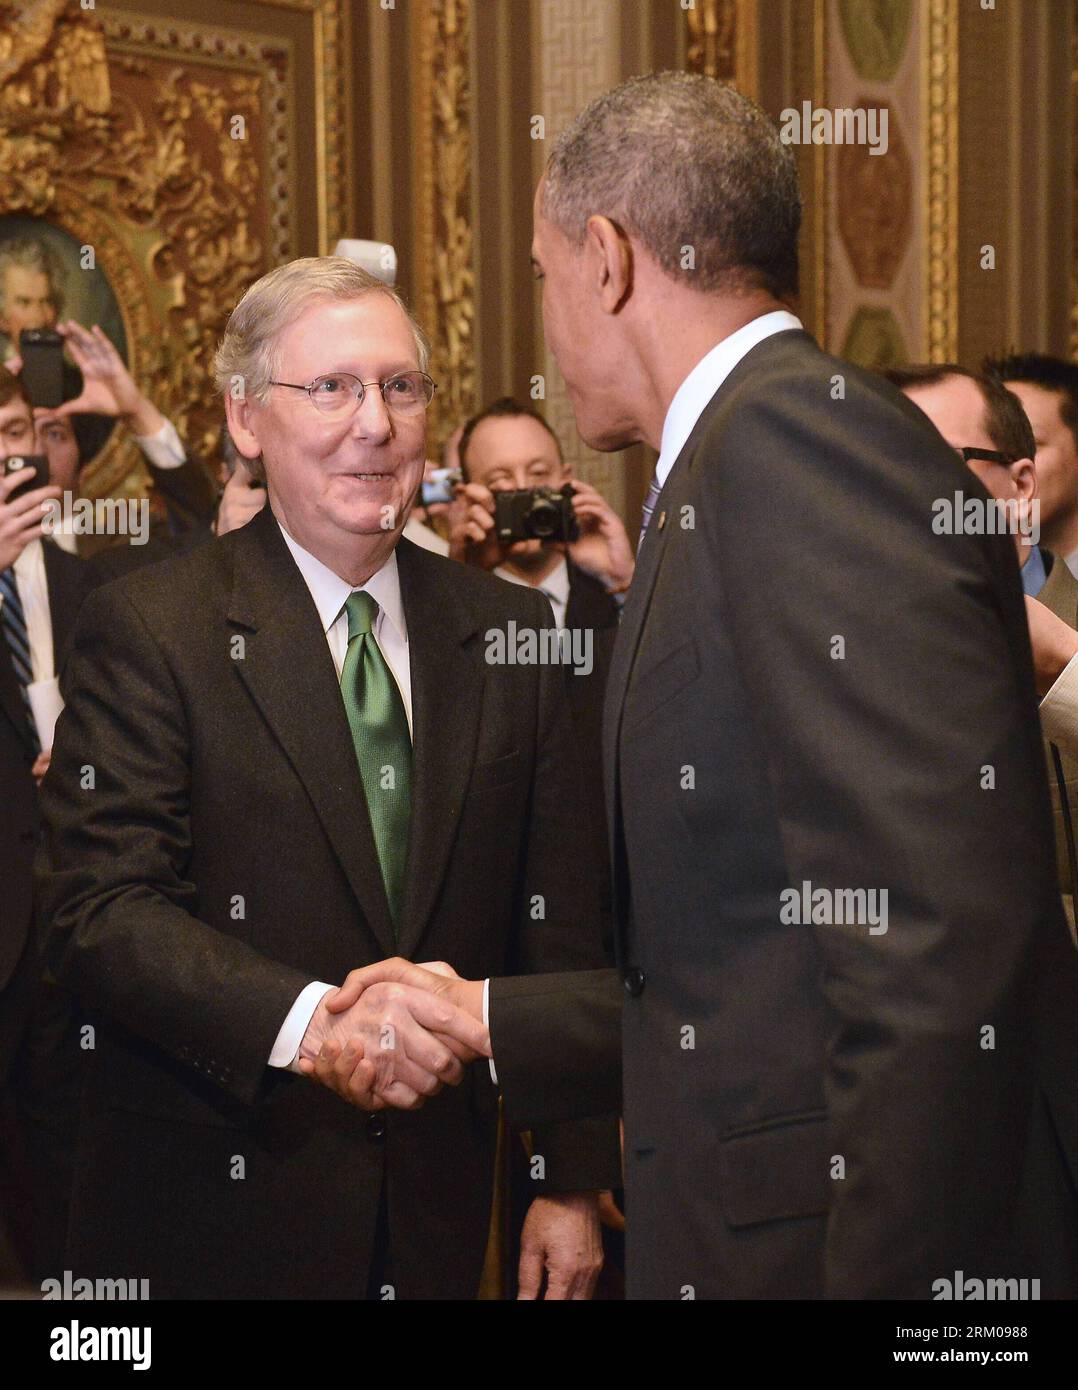 Bildnummer: 59354731  Datum: 15.03.2013  Copyright: imago/Xinhua (130314) -- WASHINGTON D.C., March 14, 2013 (Xinhua) -- U.S. President Barack Obama (R) shakes hand with Senate Republican Minority Leader Mitch McConnell before a meeting with the Senate Republicans on Capitol Hill in Washington D.C., capital of the United States, March 14, 2013. (Xinhua/Zhang Jun) US-WASHINGTON-POLITICS-CONGRESS-OBAMA PUBLICATIONxNOTxINxCHN Politik people USA premiumd x0x xac 2013 hoch      59354731 Date 15 03 2013 Copyright Imago XINHUA  Washington D C March 14 2013 XINHUA U S President Barack Obama r Shakes H Stock Photo